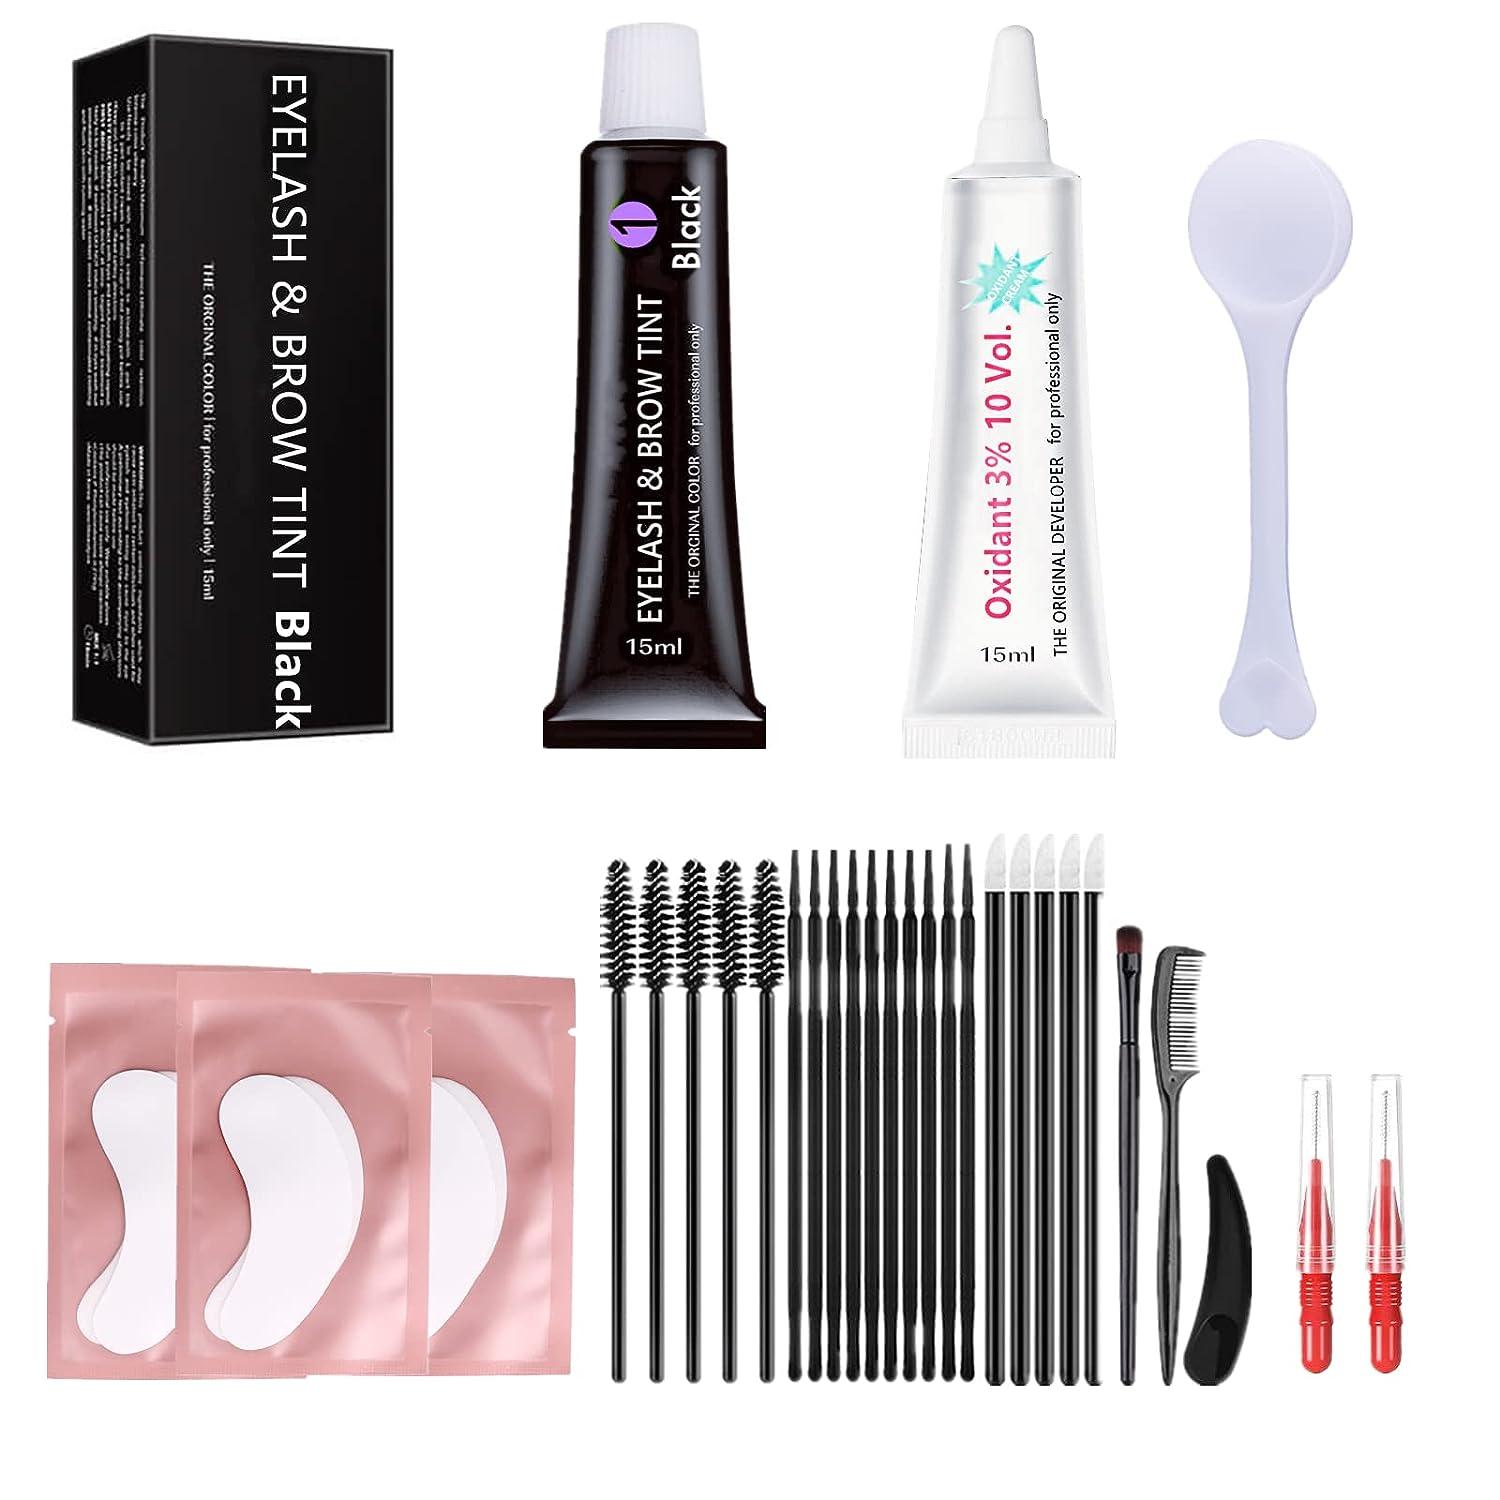 Lash T-i-n-t Kit Black 15ml Eyelash D-y-e Full Brow T.i.n.t. Set With Tools  DIY Eyelash Eyebrow T-i-n-ting Makeup At Home Be Voluminous And Energetic  For 6 Weeks(Black Stain Mascara Look)